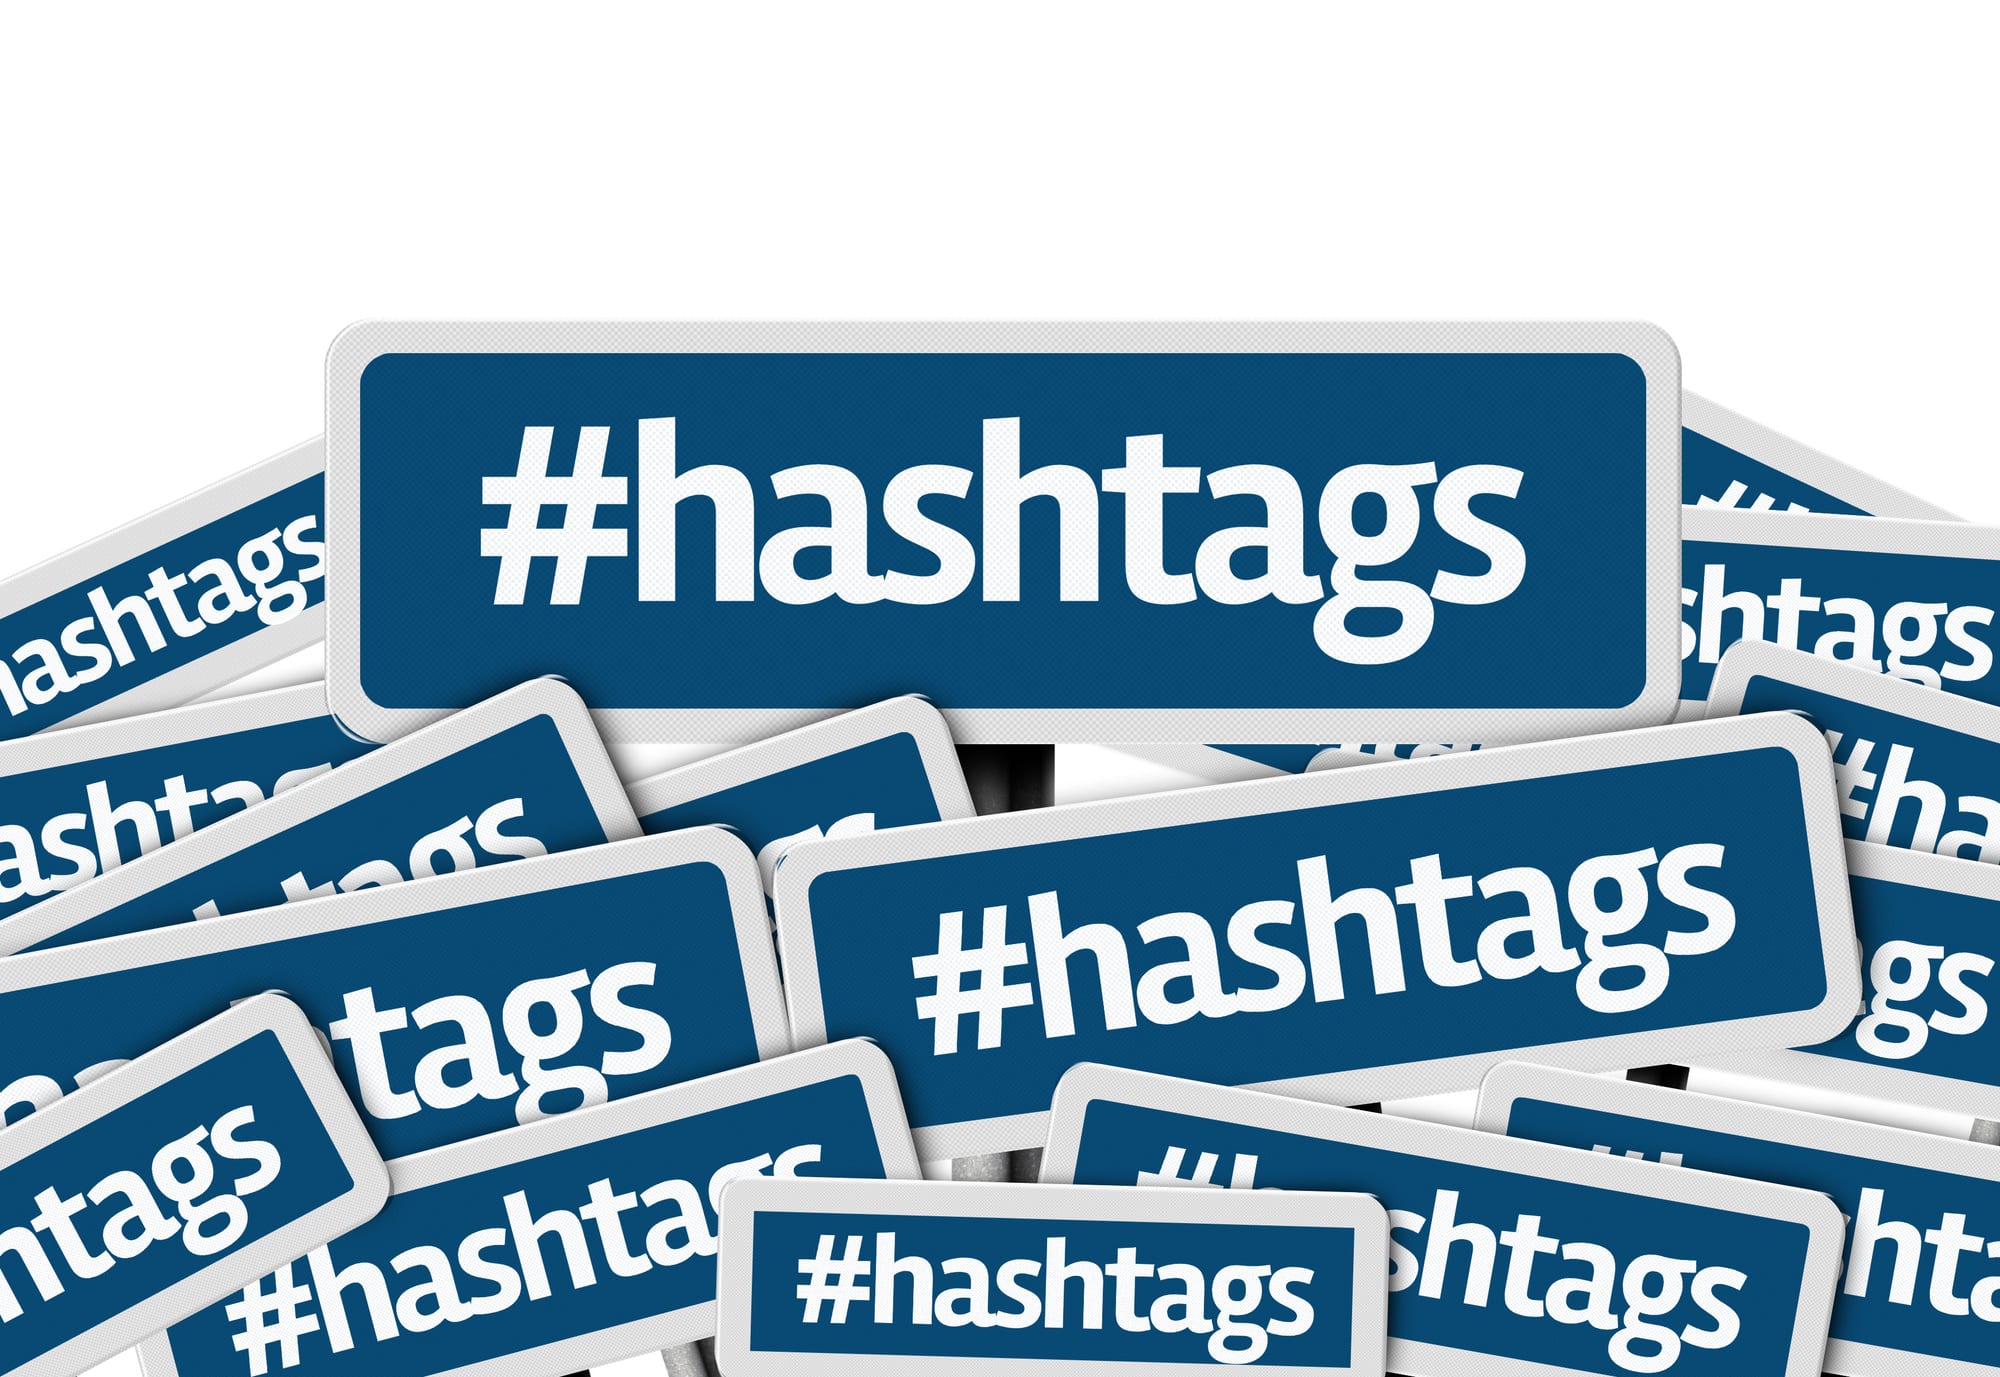 How to Use Hashtags on Instagram